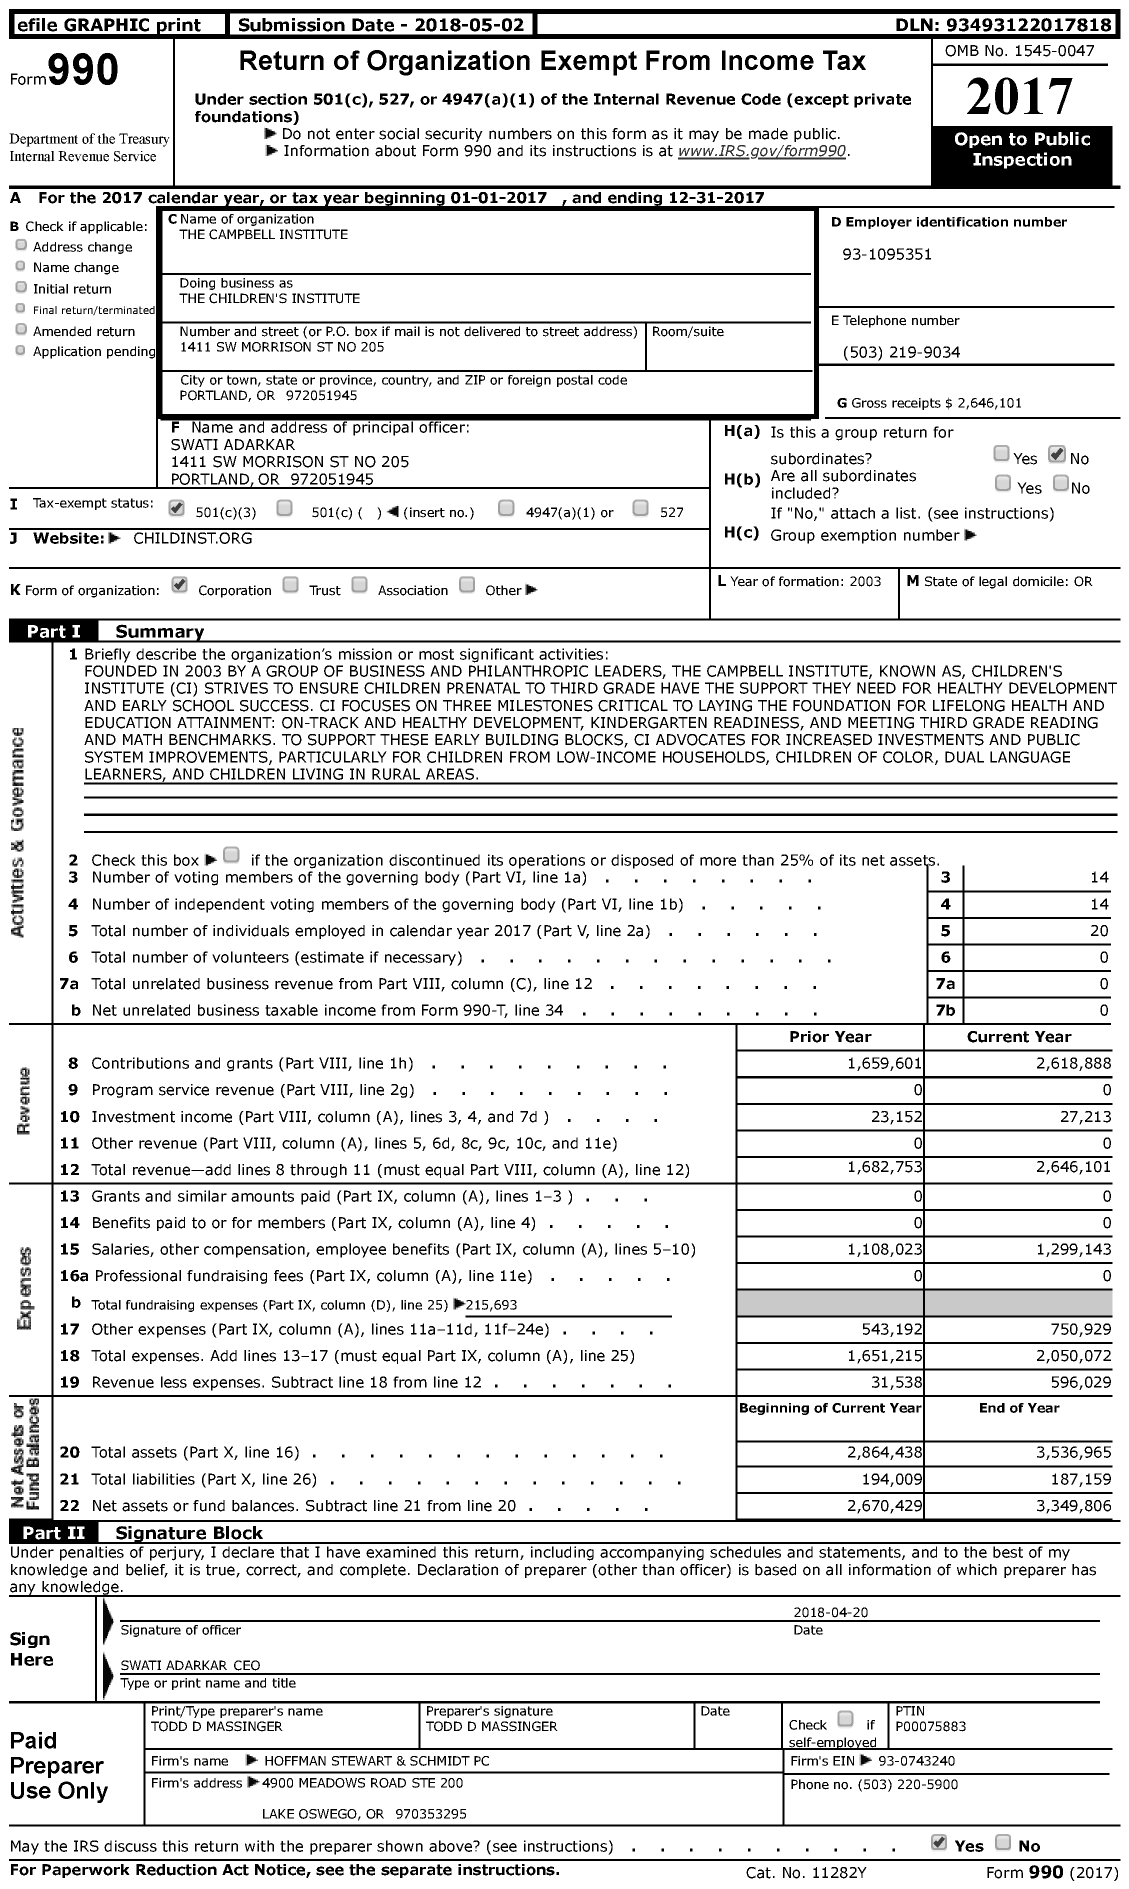 Image of first page of 2017 Form 990 for Children's Institute